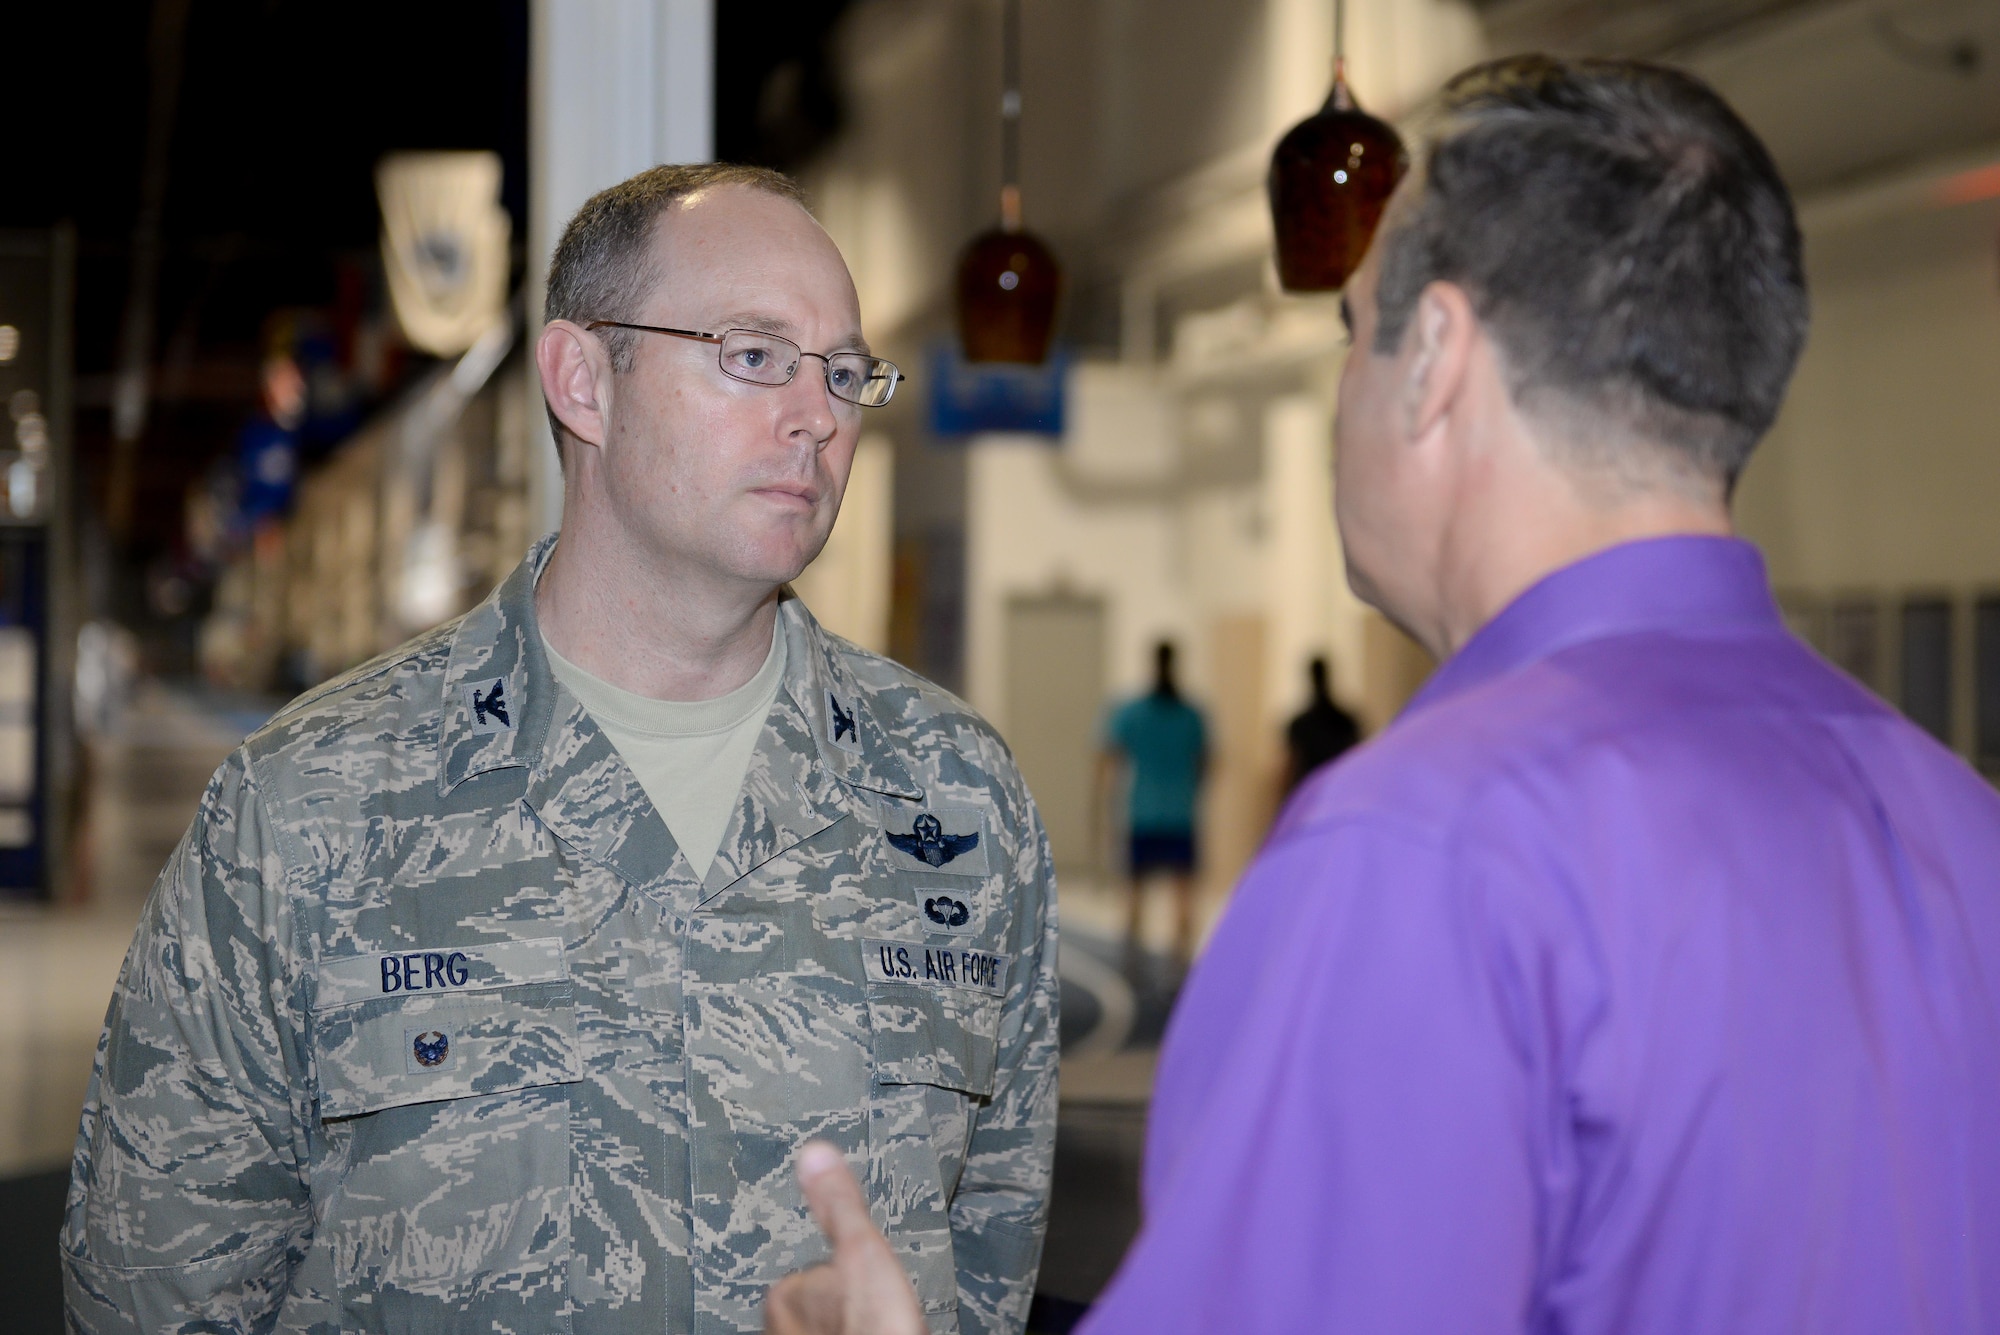 U.S. Air Force Col. David Berg (left), 55th Wing vice commander, talks with Kenneth Komyathy, family advocacy director, about the display set up to support Domestic Violence Awareness month in the Offutt Field House at Offutt Air Force Base, Neb., Oct. 18, 2016. According to the Department of Defense, domestic violence is an offense under the United States Code, the Uniform Code of Military Justice or state law that involves the use, attempted use, threat, use of force, violence against a person who is a current or former spouse, a person who shares a child with the abuser, a current or former intimate partner with whom the abuser shares a common domicile. (U.S. Air Force photo by Zachary Hada)